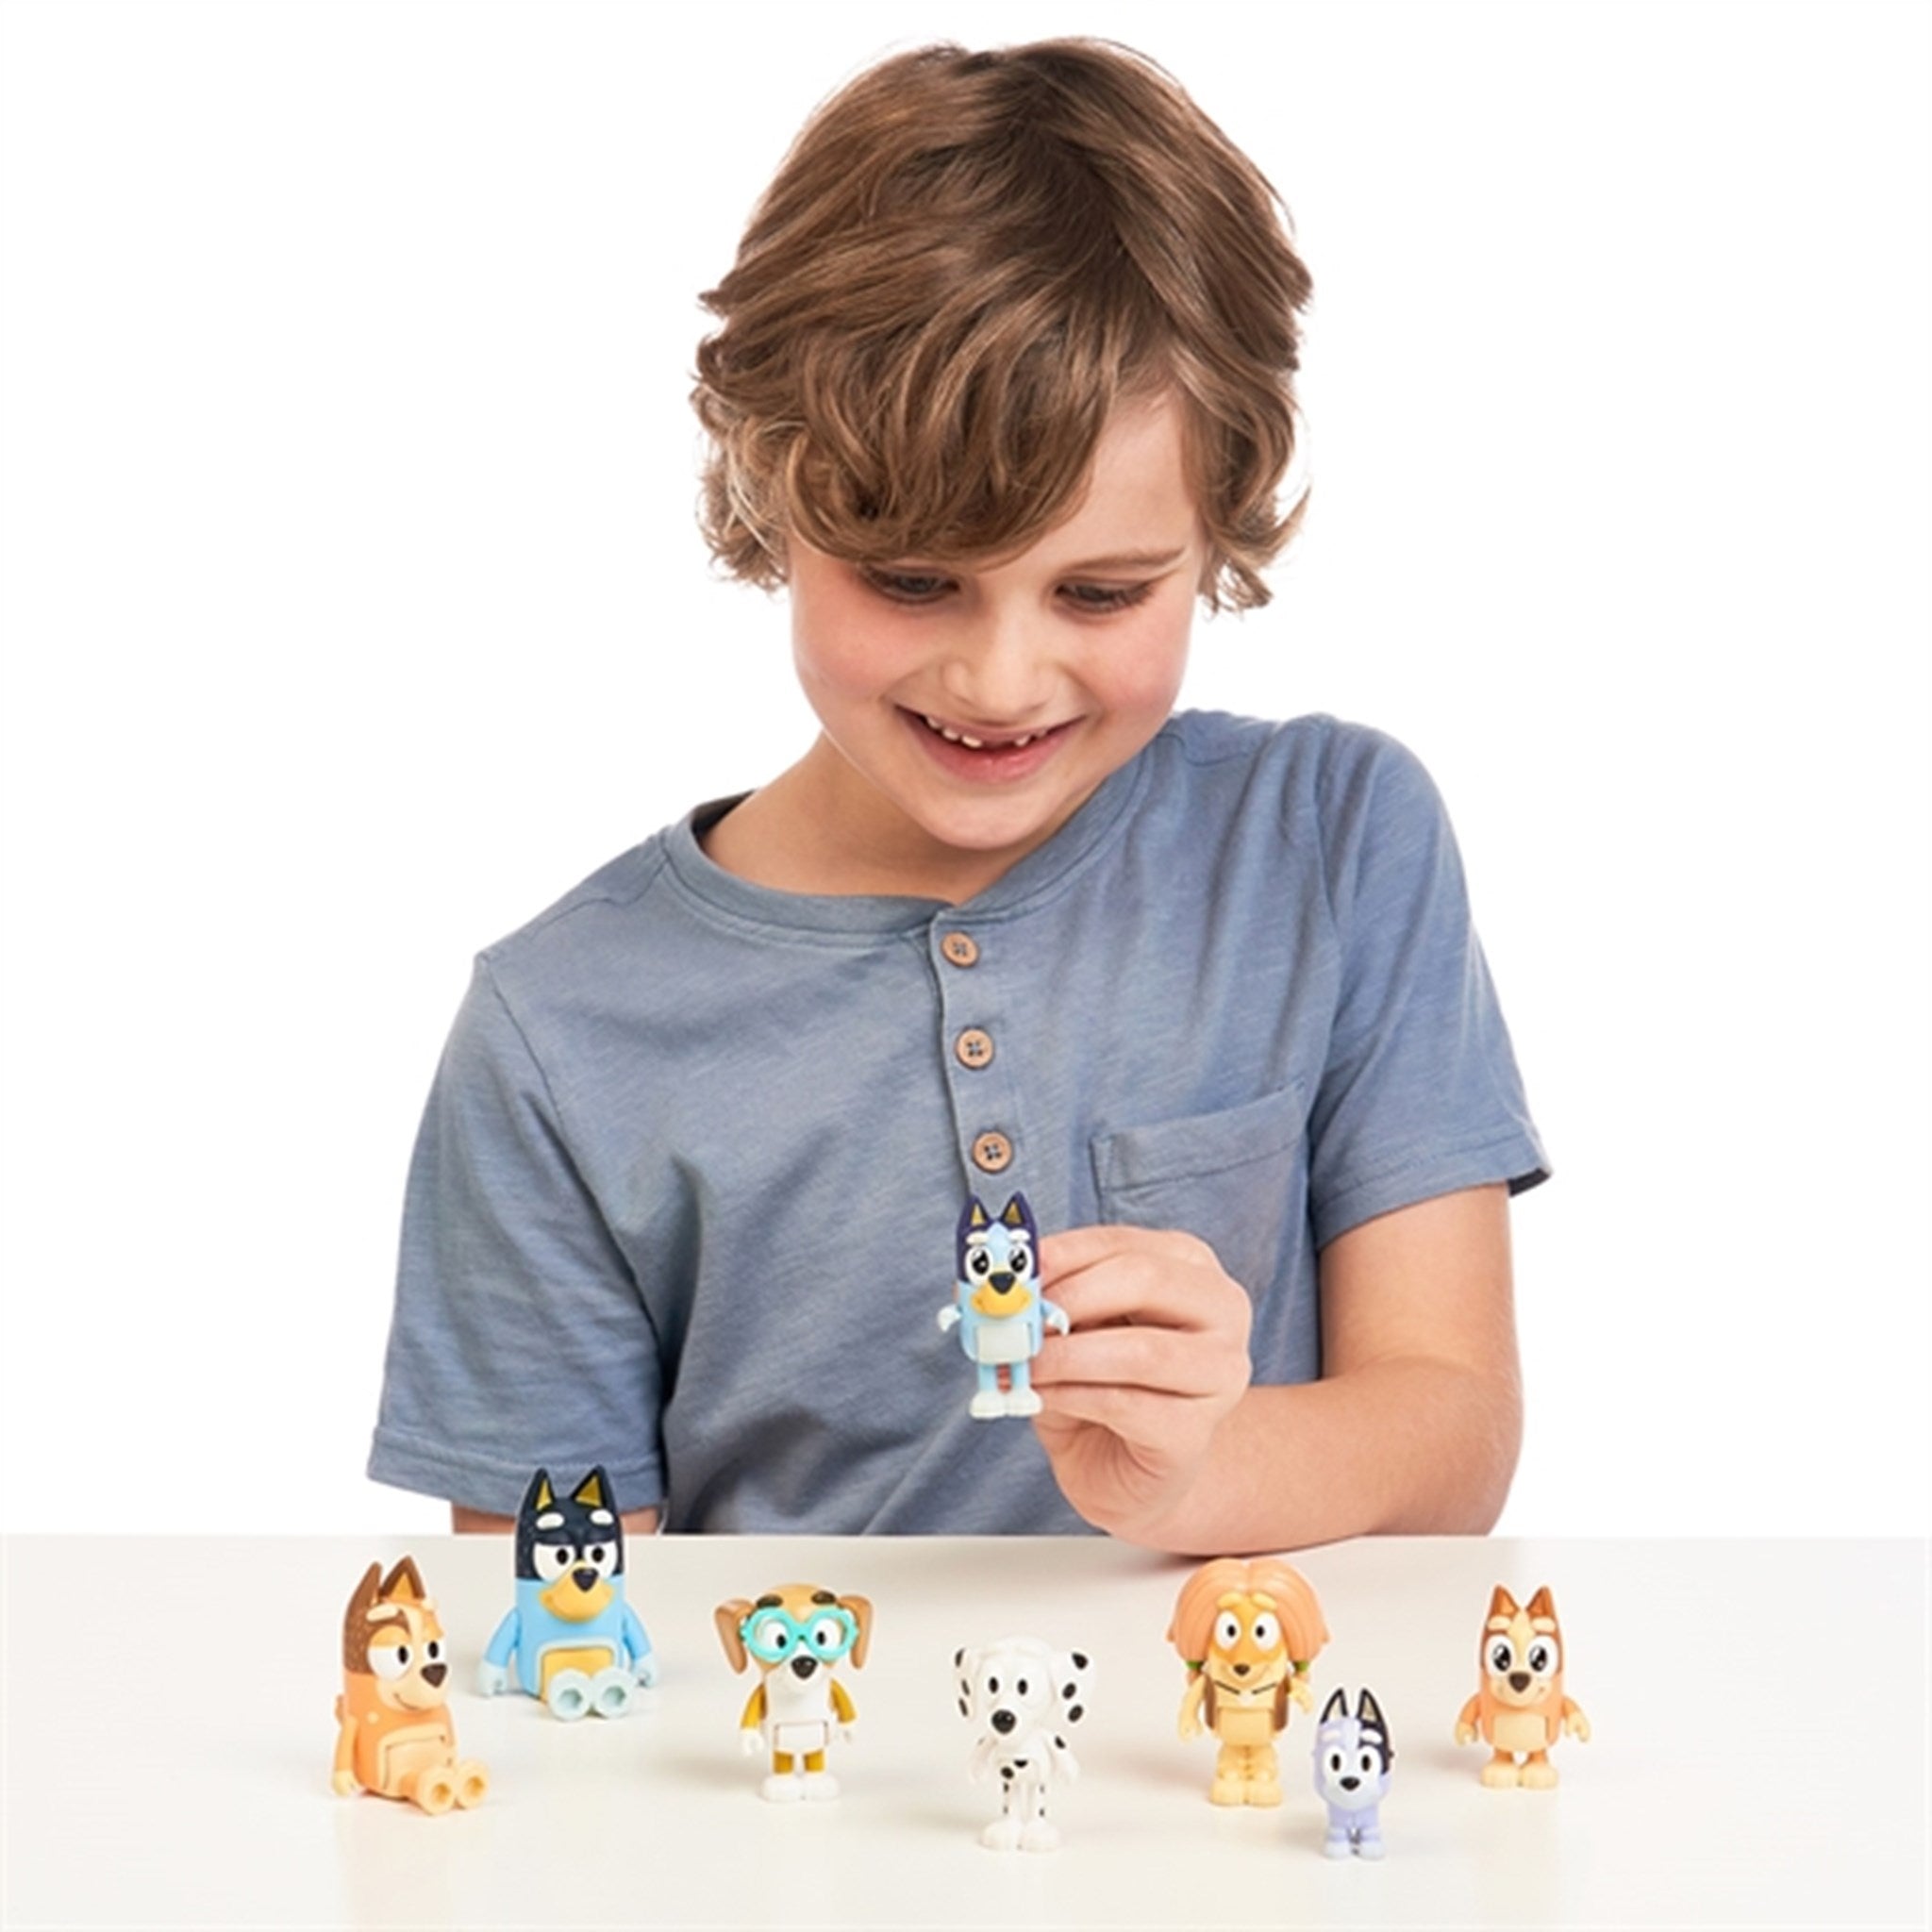 Bluey Figures 8-pack 4